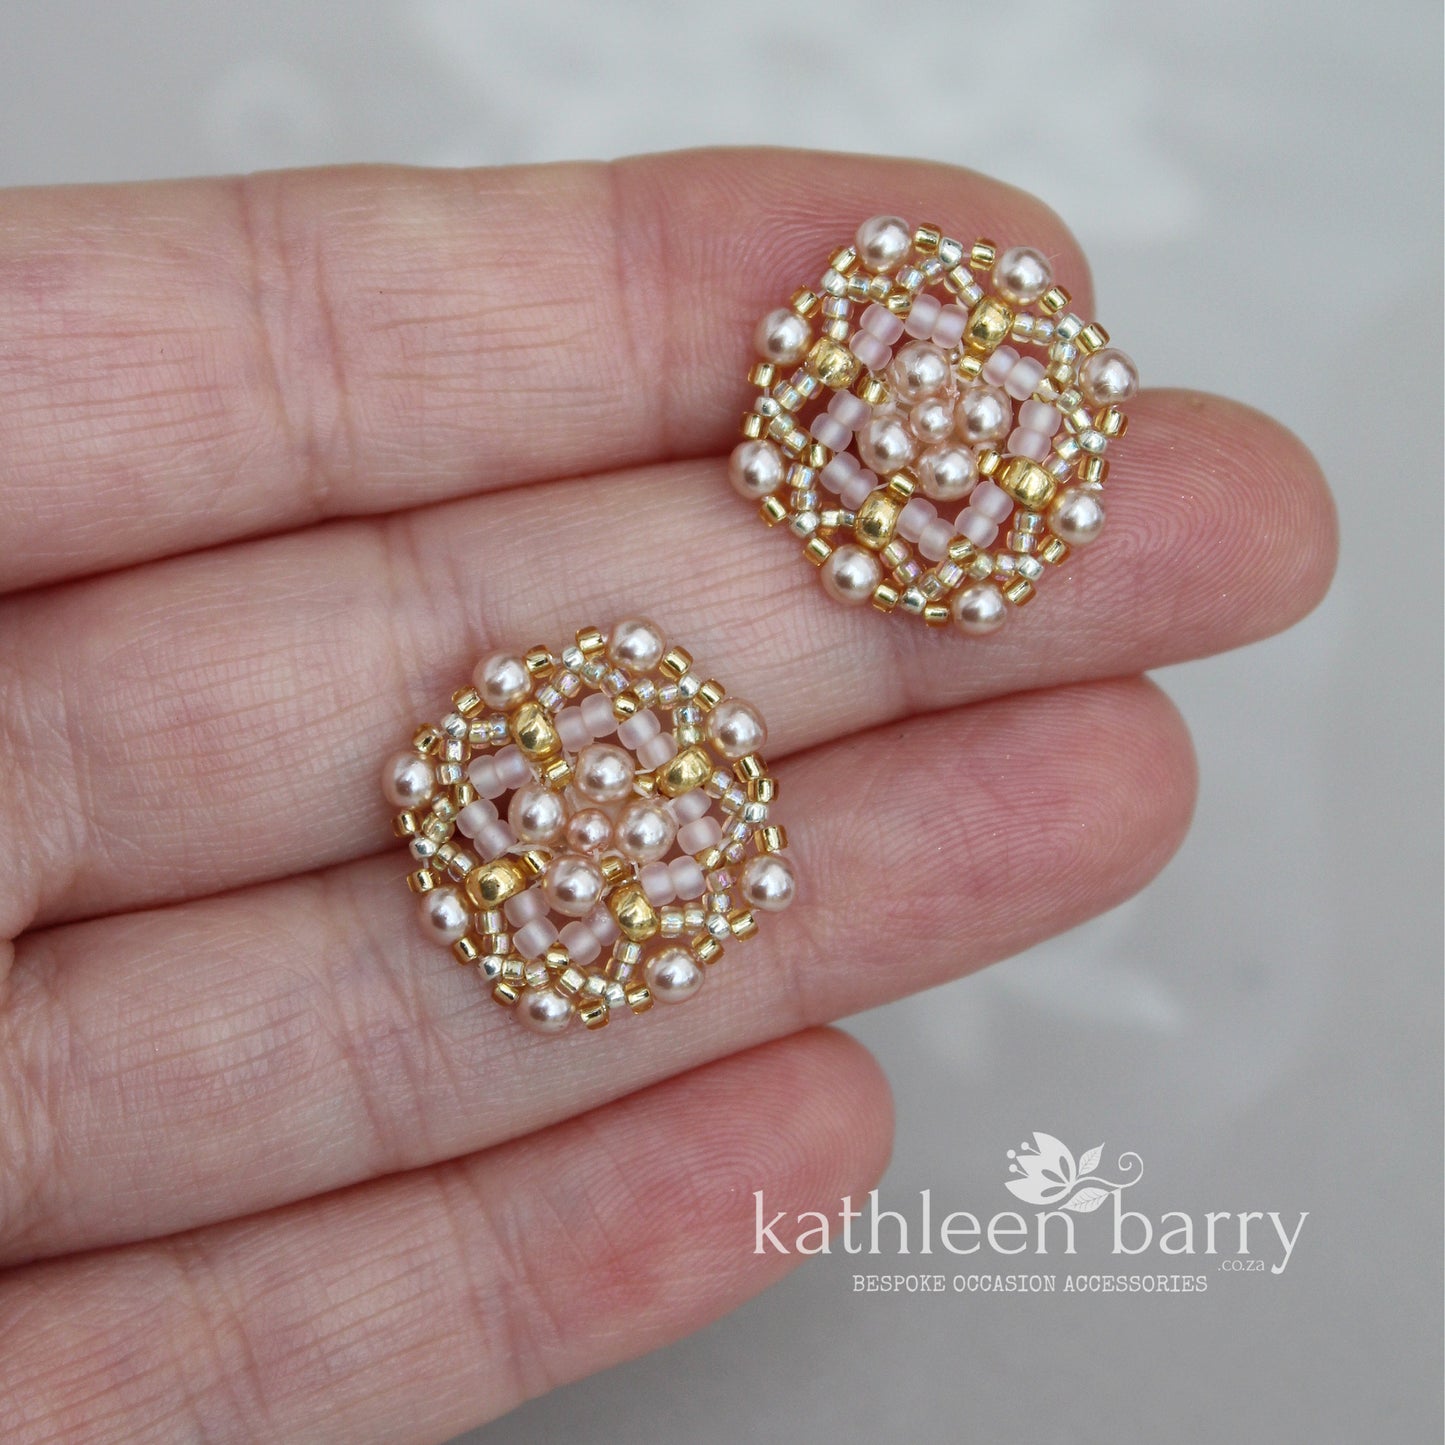 Rolien stud earrings pearls and Japanese seed beads - Custom color options available